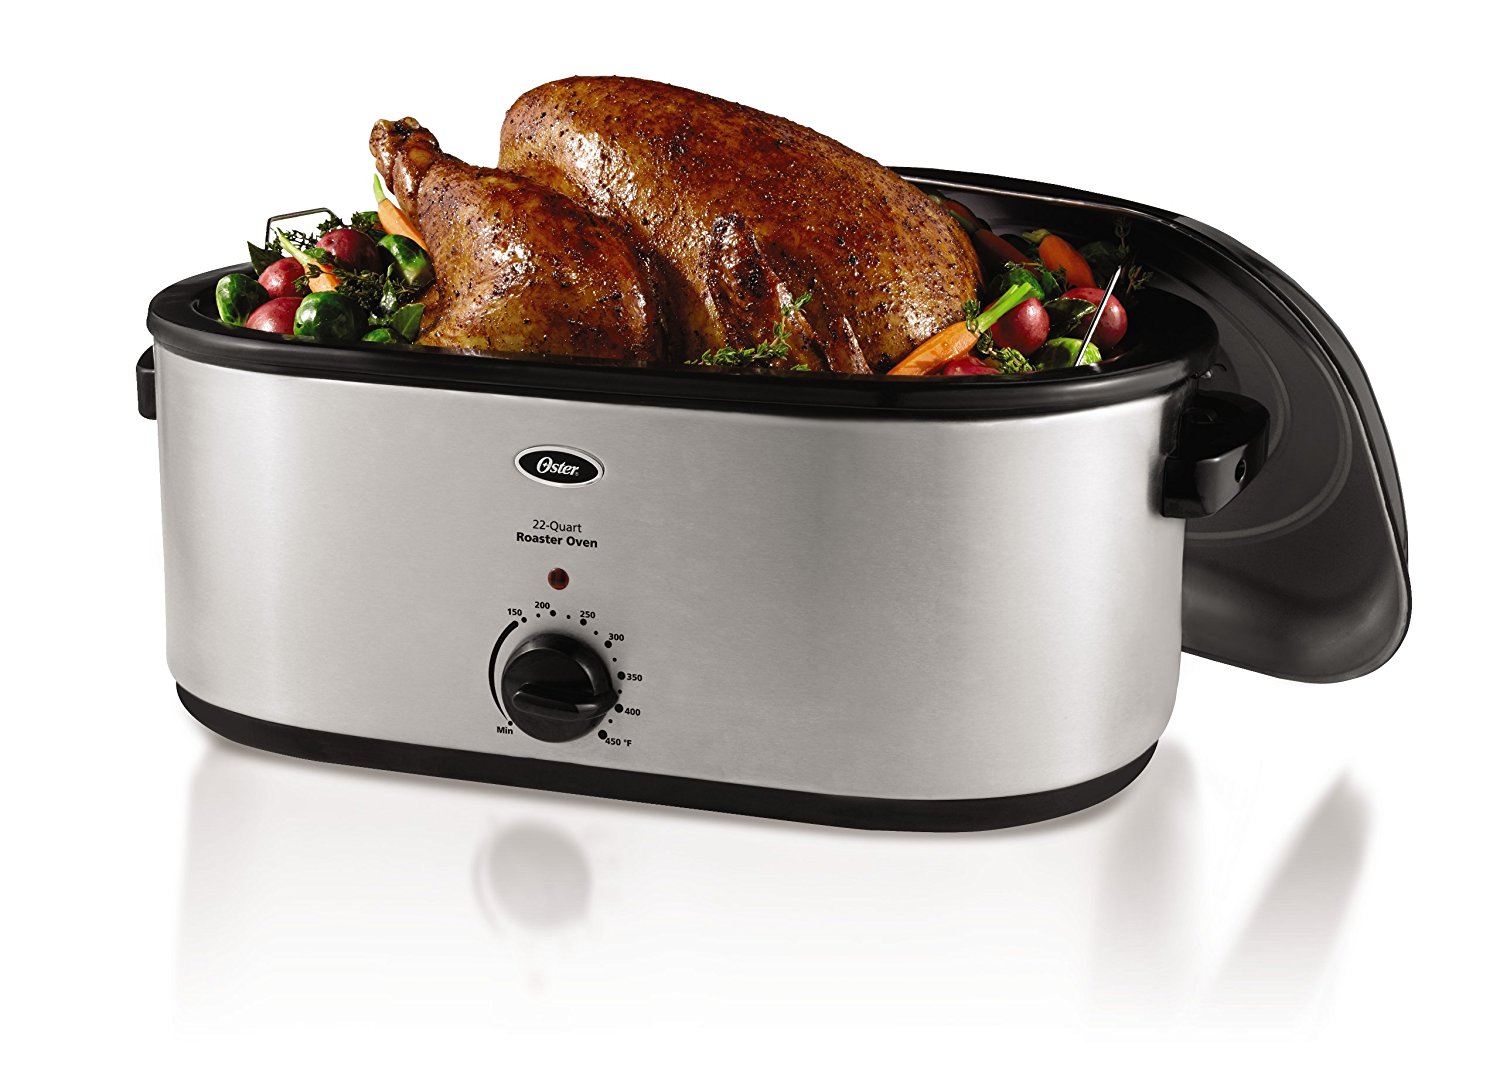 Oster CKSTRS23-SB 22-Quart Roaster Oven with Self-Basting Lid, Stainless Steel Finish